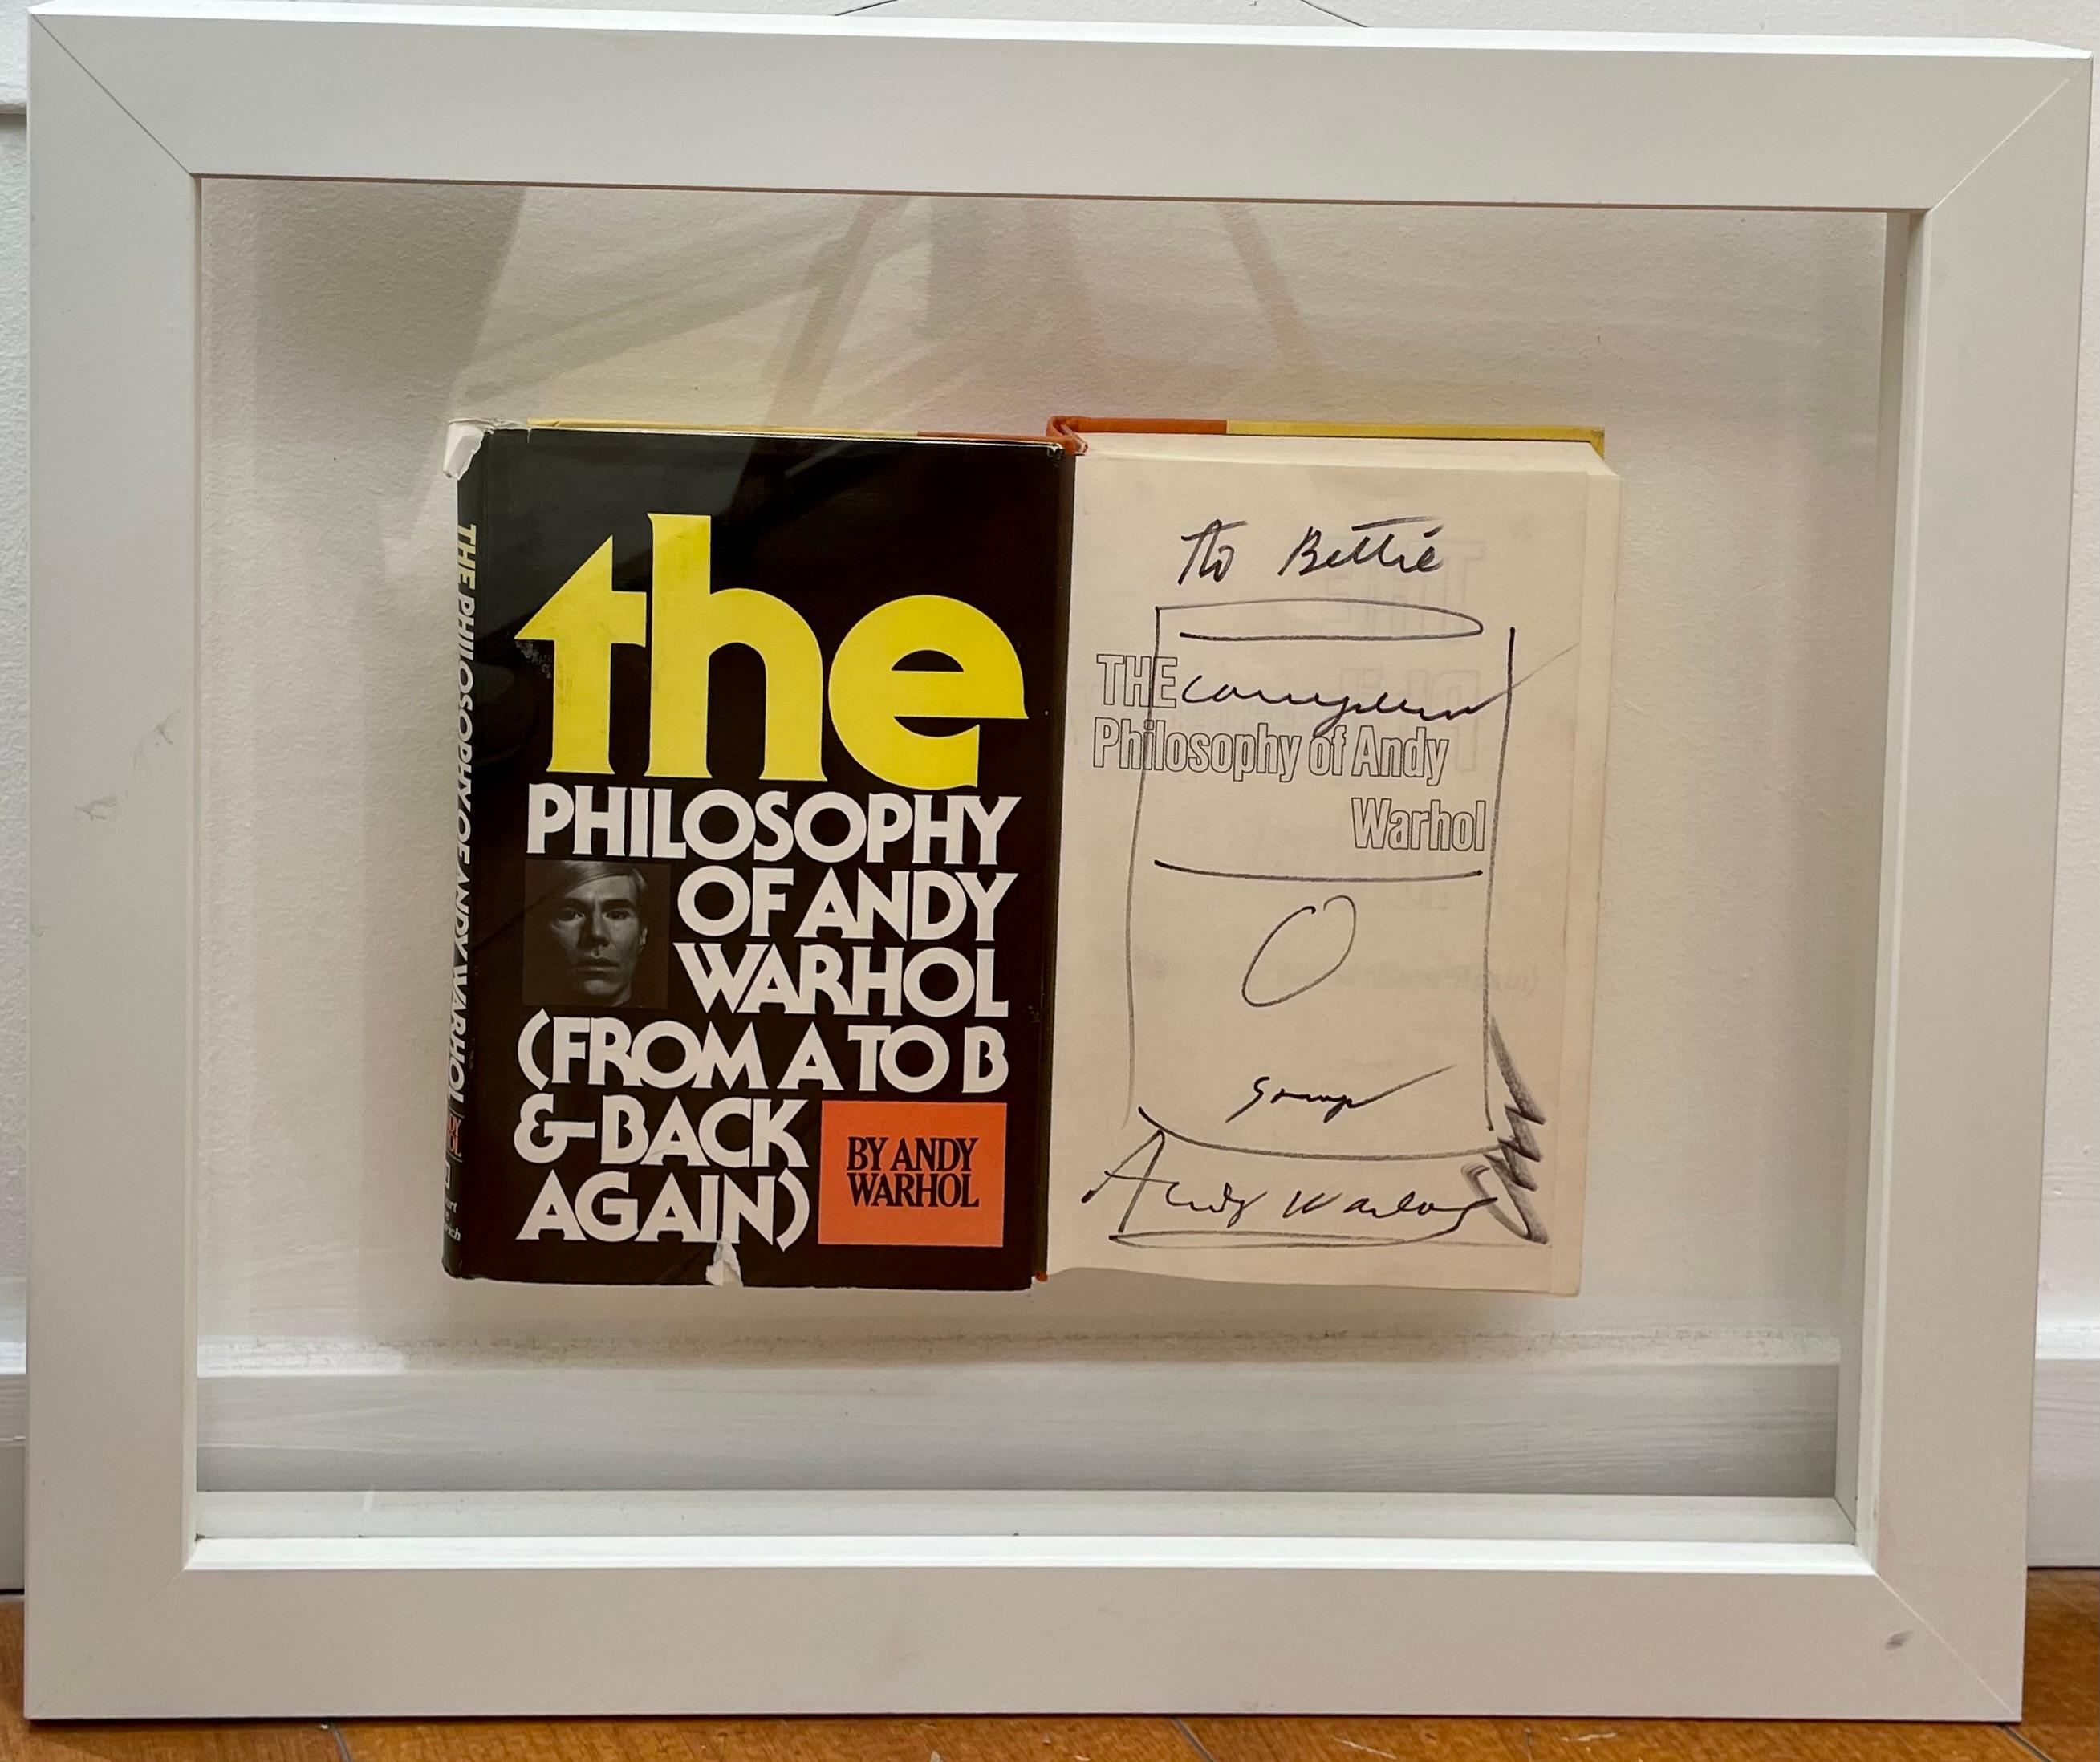 A book by Andy Warhol. Signed and sketched by the artist on the first page of the book.
Signed on the bottom of the first page.

The Philosophy of Andy Warhol (From A to B & Back Again) 
Authored by Andy Warhol. 
Published by Harcourt Brace